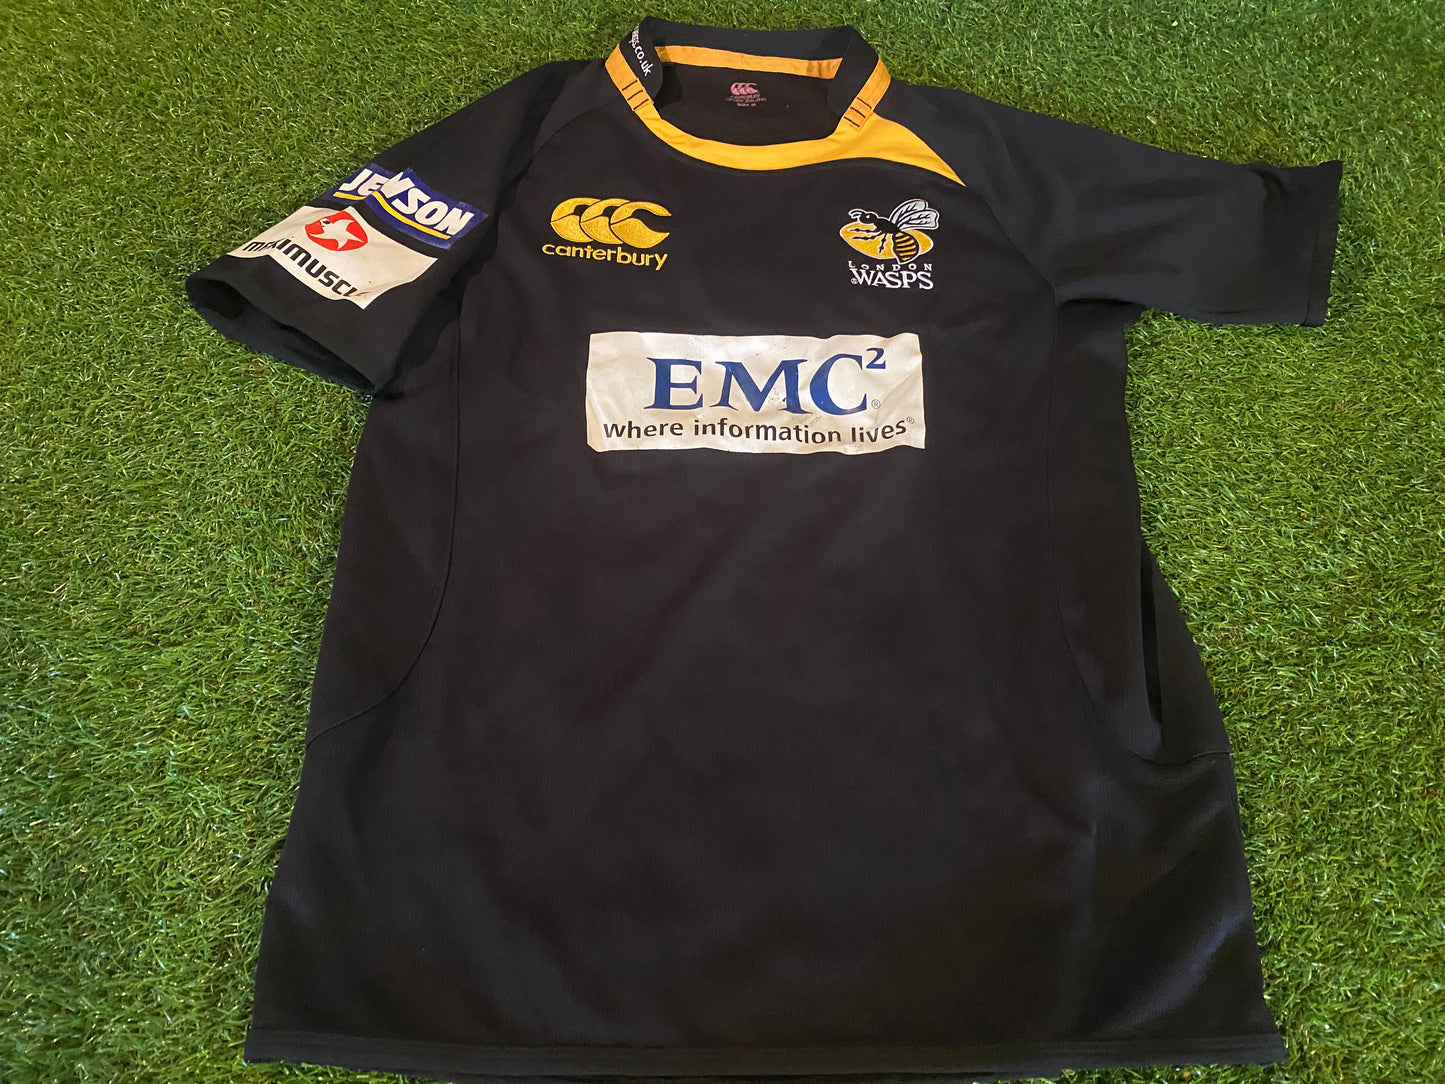 Wasps England Rugby Union Football Medium Mans Vintage CCC Made Jersey